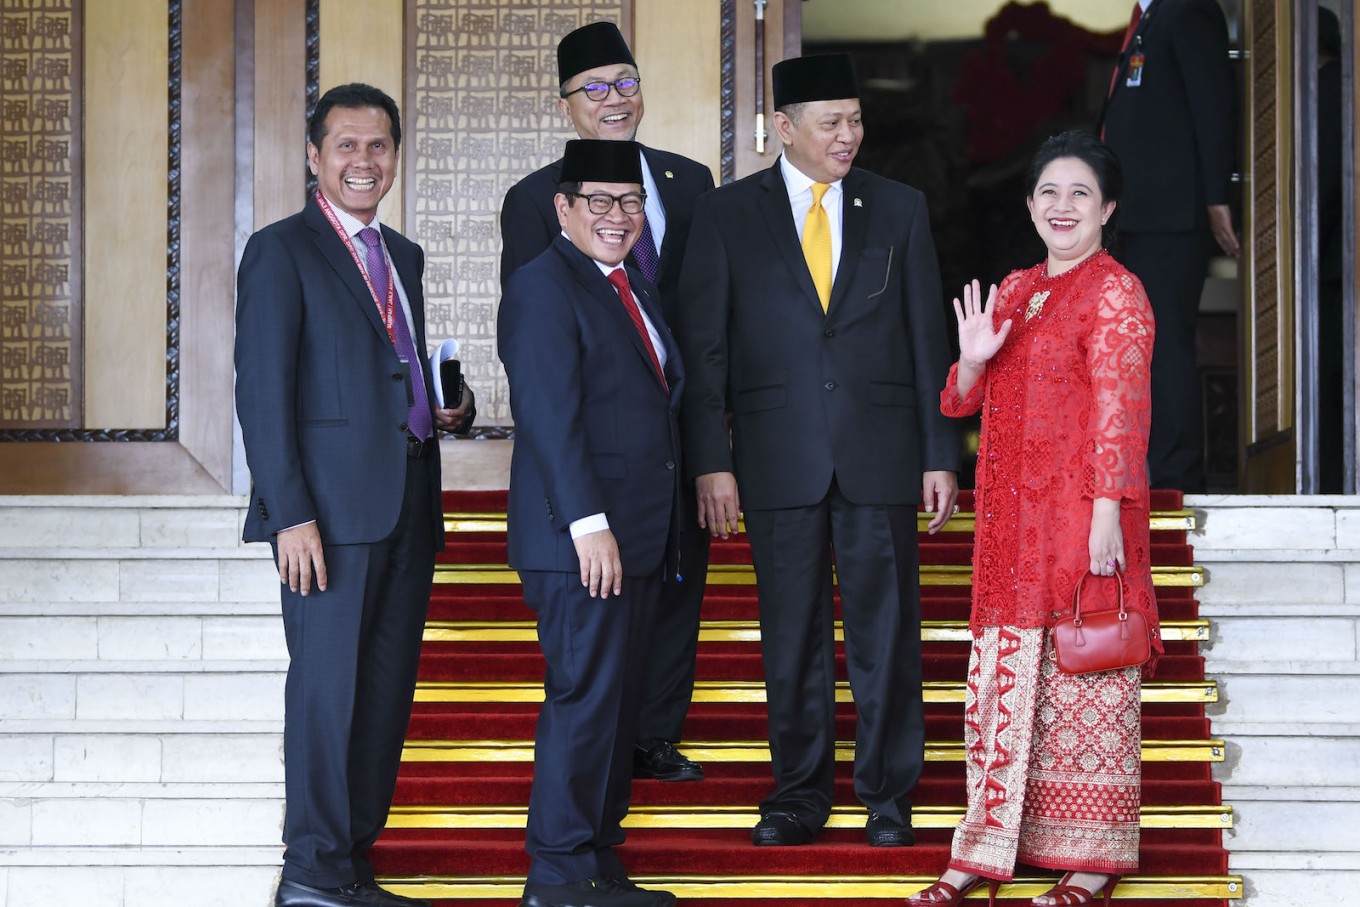 [Oct 2] The House of Representatives of the Republic of Indonesia elects the first female Speaker